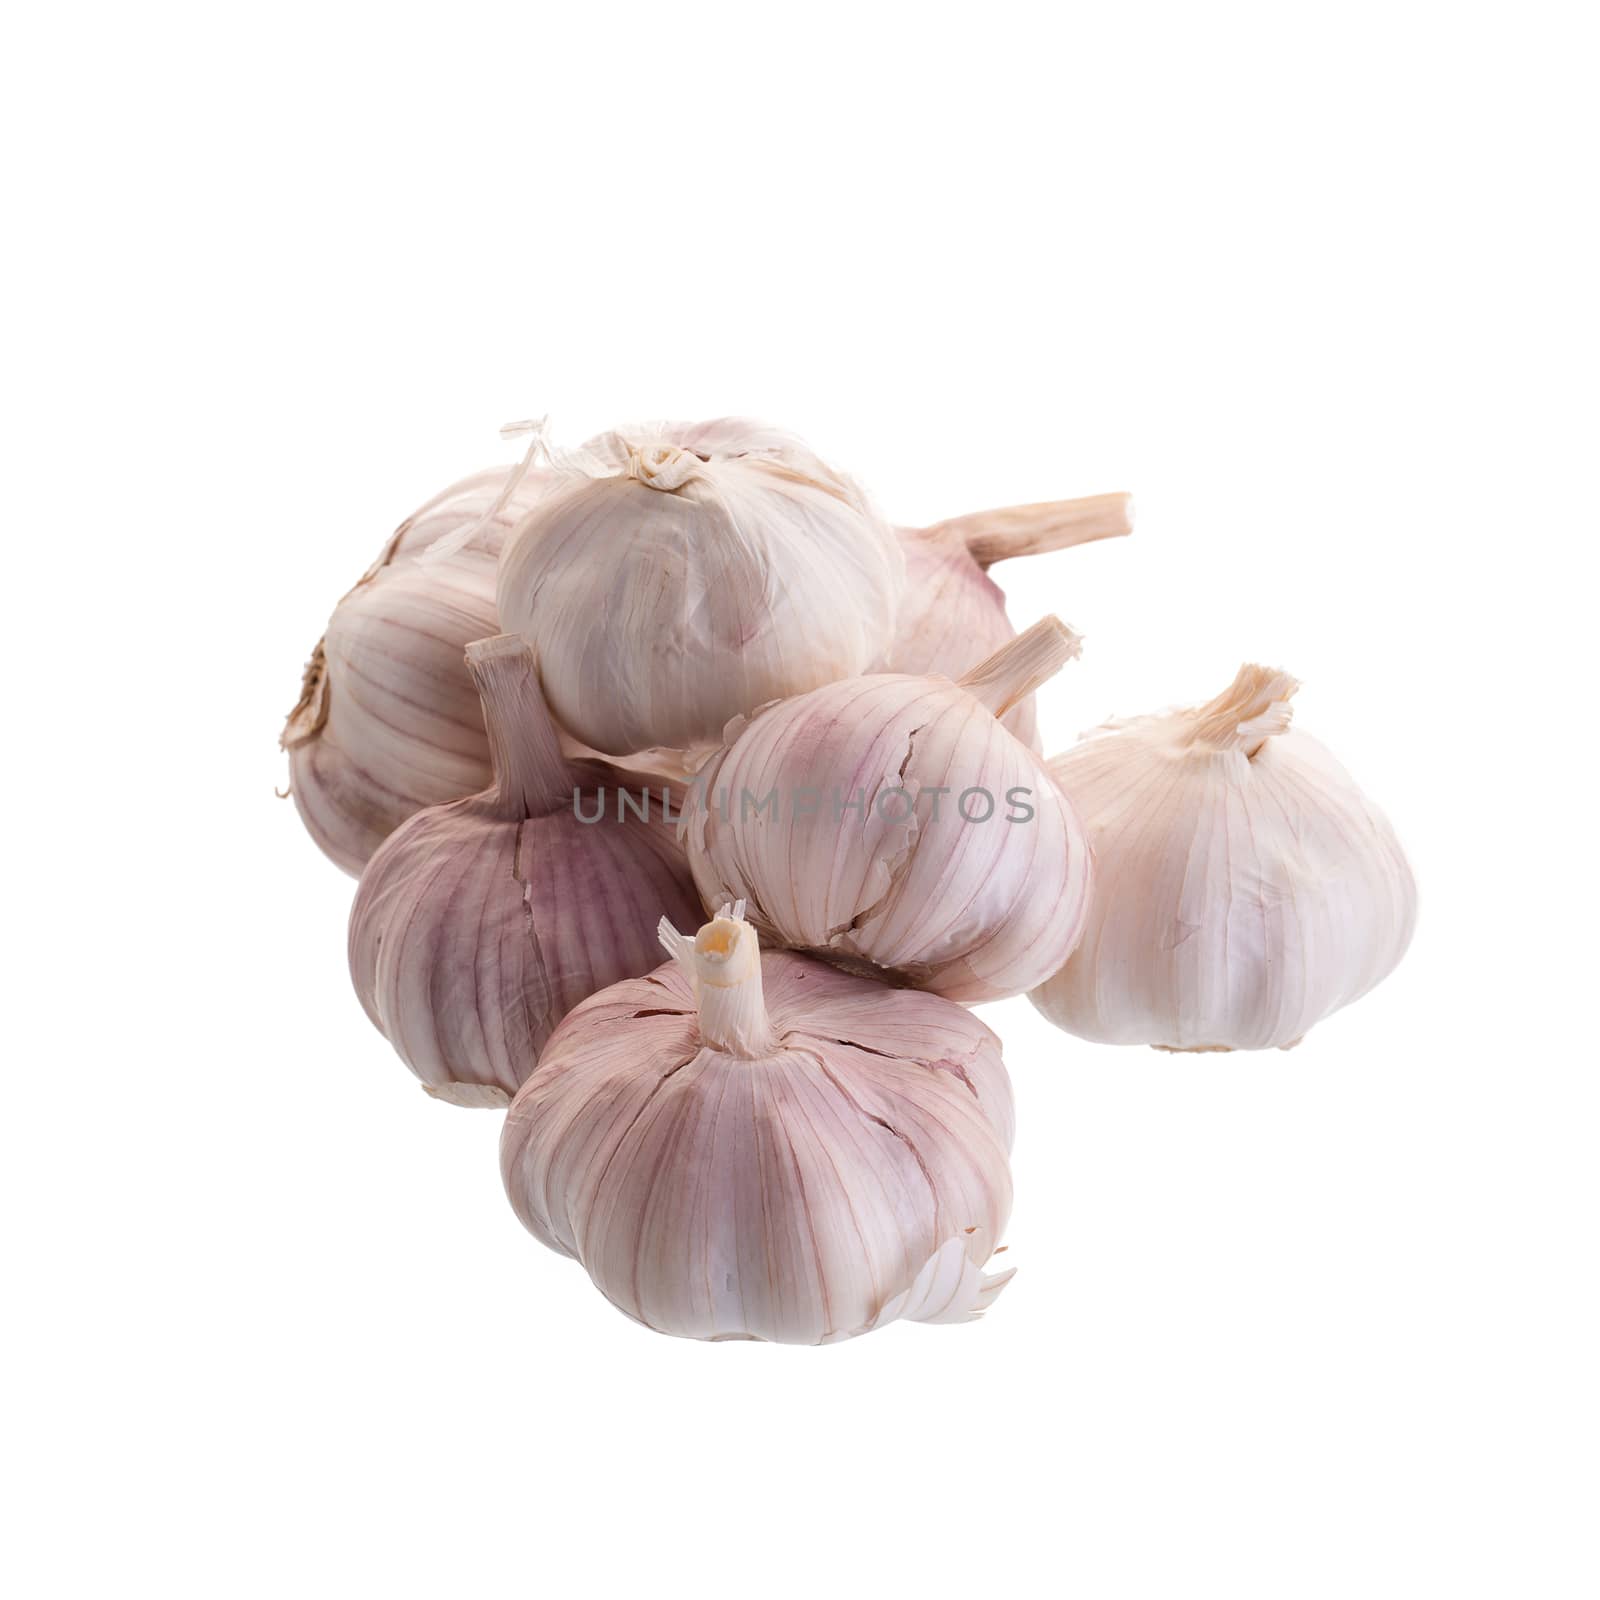 Garlic isolated on a white background by kaiskynet